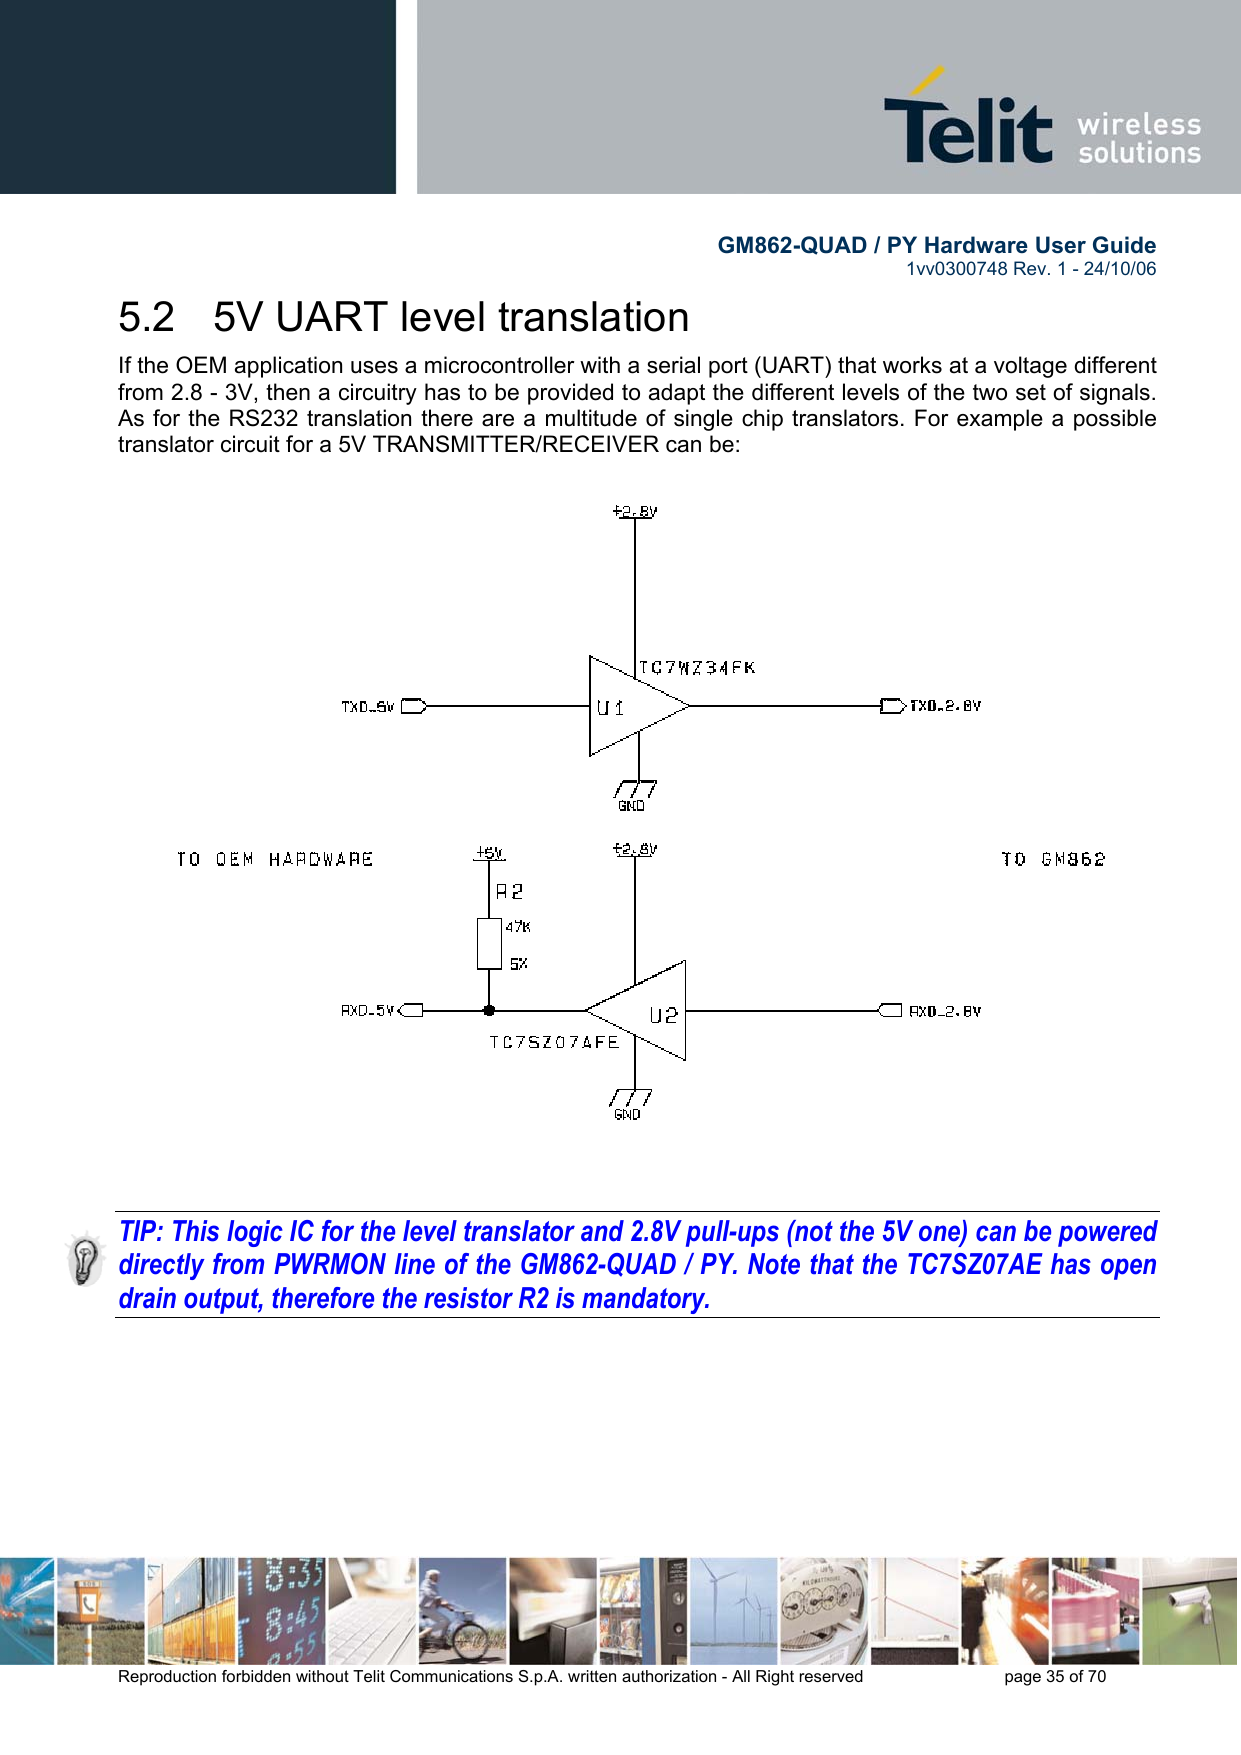        GM862-QUAD / PY Hardware User Guide   1vv0300748 Rev. 1 - 24/10/06    Reproduction forbidden without Telit Communications S.p.A. written authorization - All Right reserved    page 35 of 70  5.2   5V UART level translation If the OEM application uses a microcontroller with a serial port (UART) that works at a voltage different from 2.8 - 3V, then a circuitry has to be provided to adapt the different levels of the two set of signals. As for the RS232 translation there are a multitude of single chip translators. For example a possible translator circuit for a 5V TRANSMITTER/RECEIVER can be:      TIP: This logic IC for the level translator and 2.8V pull-ups (not the 5V one) can be powered directly from PWRMON line of the GM862-QUAD / PY. Note that the TC7SZ07AE has open drain output, therefore the resistor R2 is mandatory. 